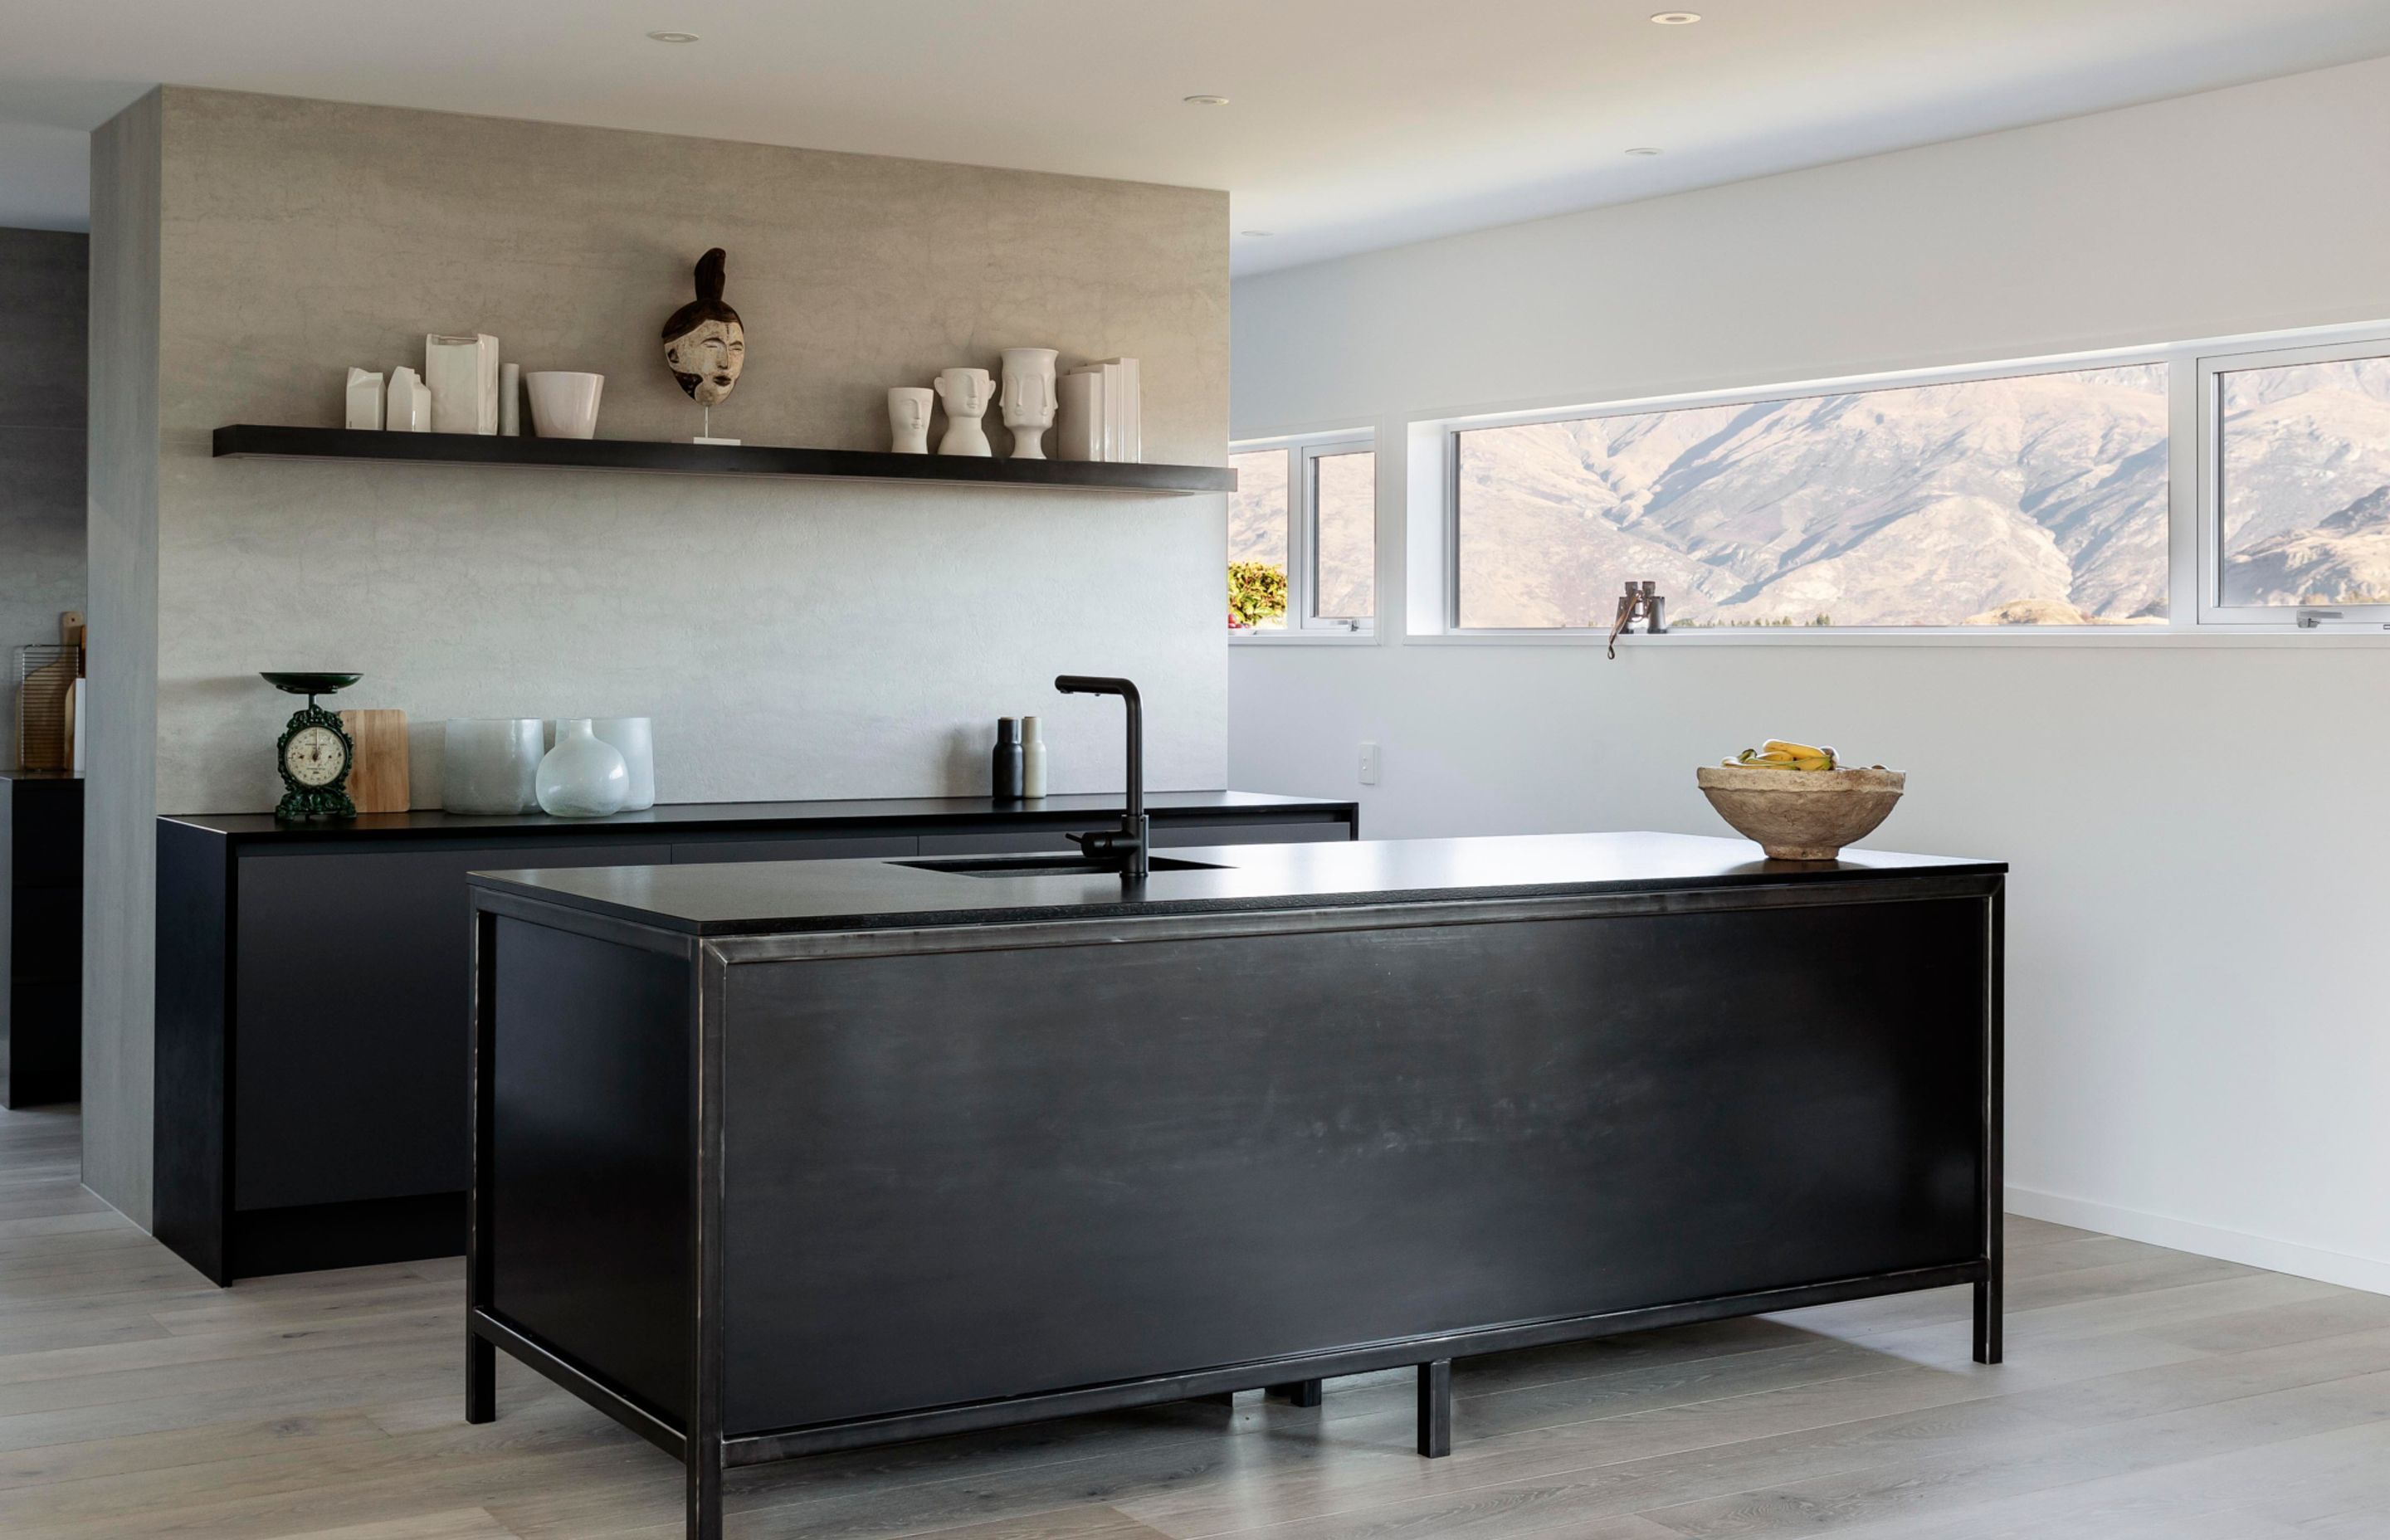 The bold, dark kitchen features cabinetry that looks like furniture placed into the space.